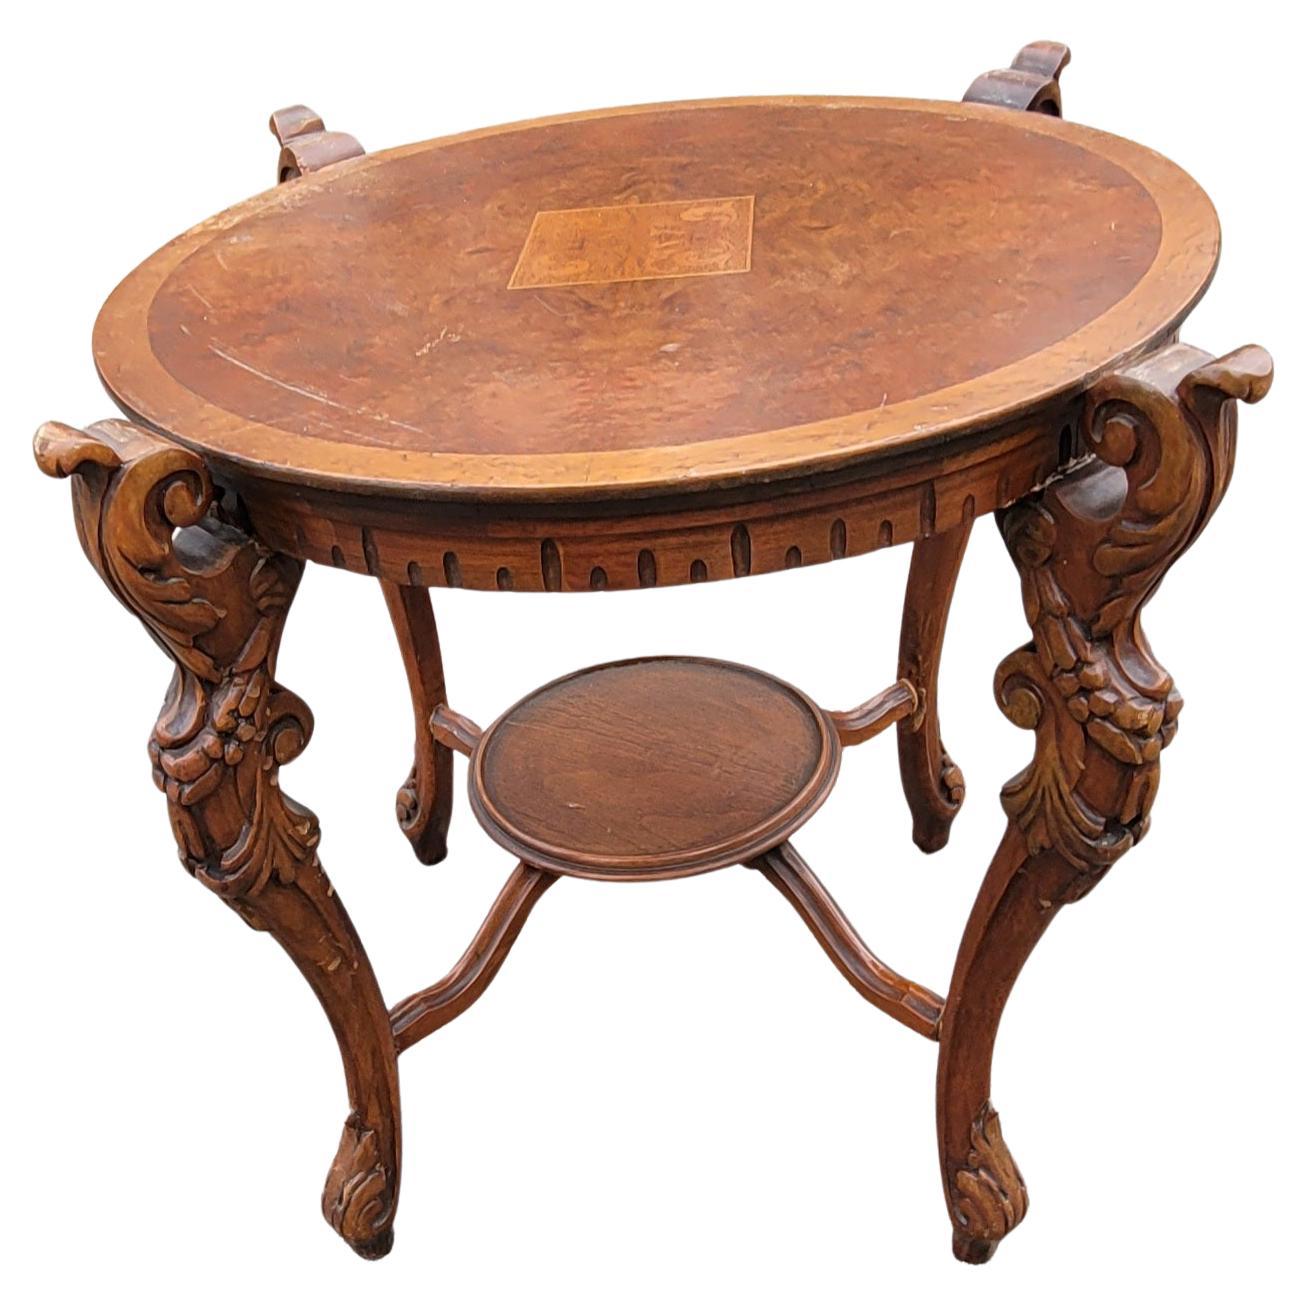 Renaissance Revival French Renaissance Style Carved Walnut Side Table with Glass Tray Top For Sale